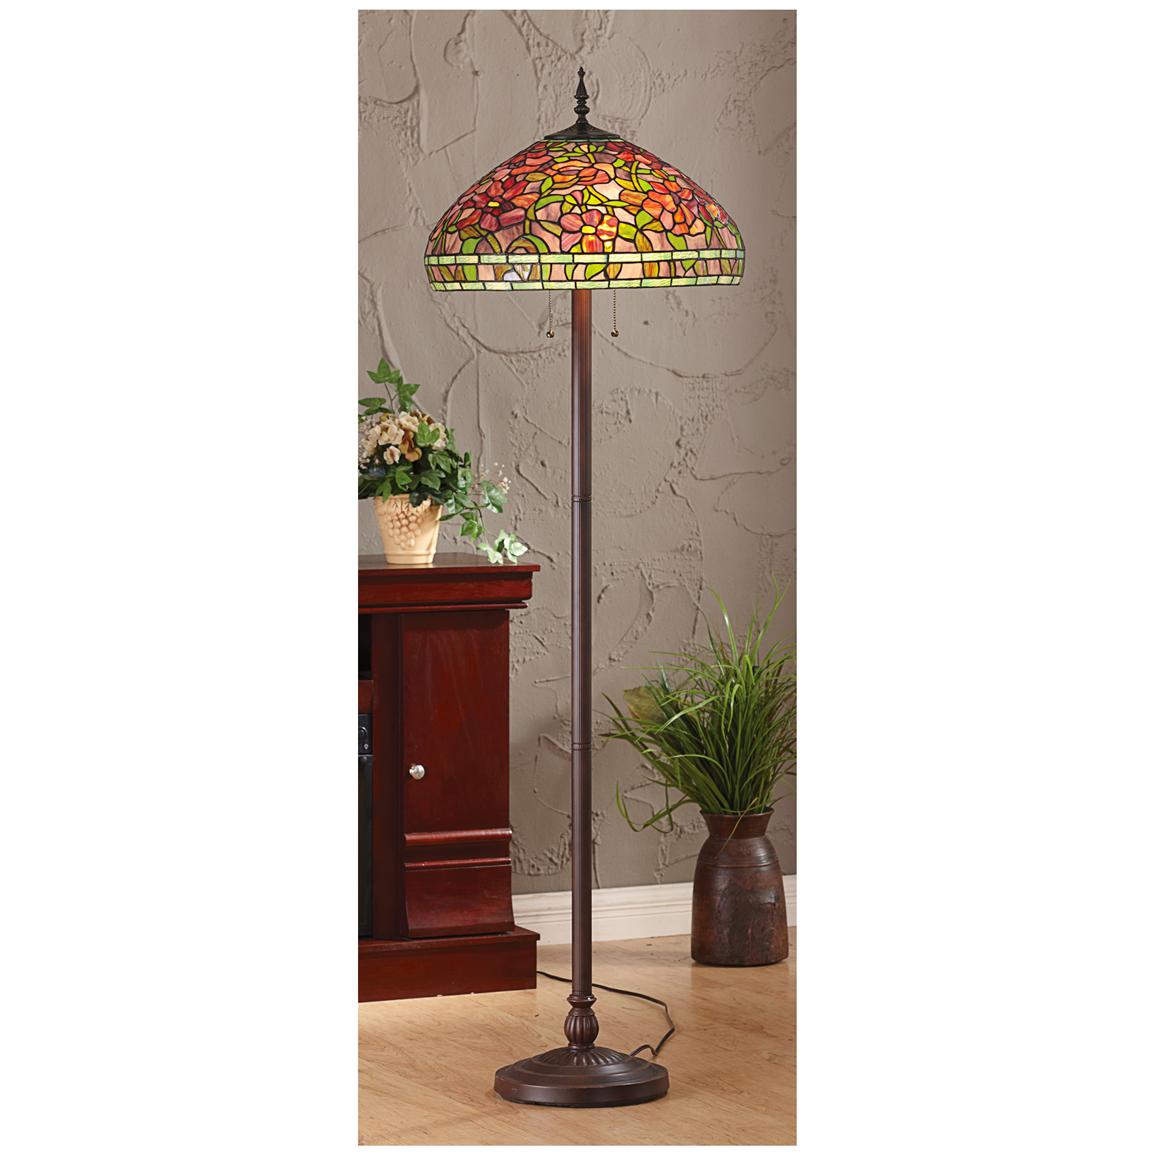 Tiffany-style Floor Lamp - 581824, Lighting at Sportsman's Guide